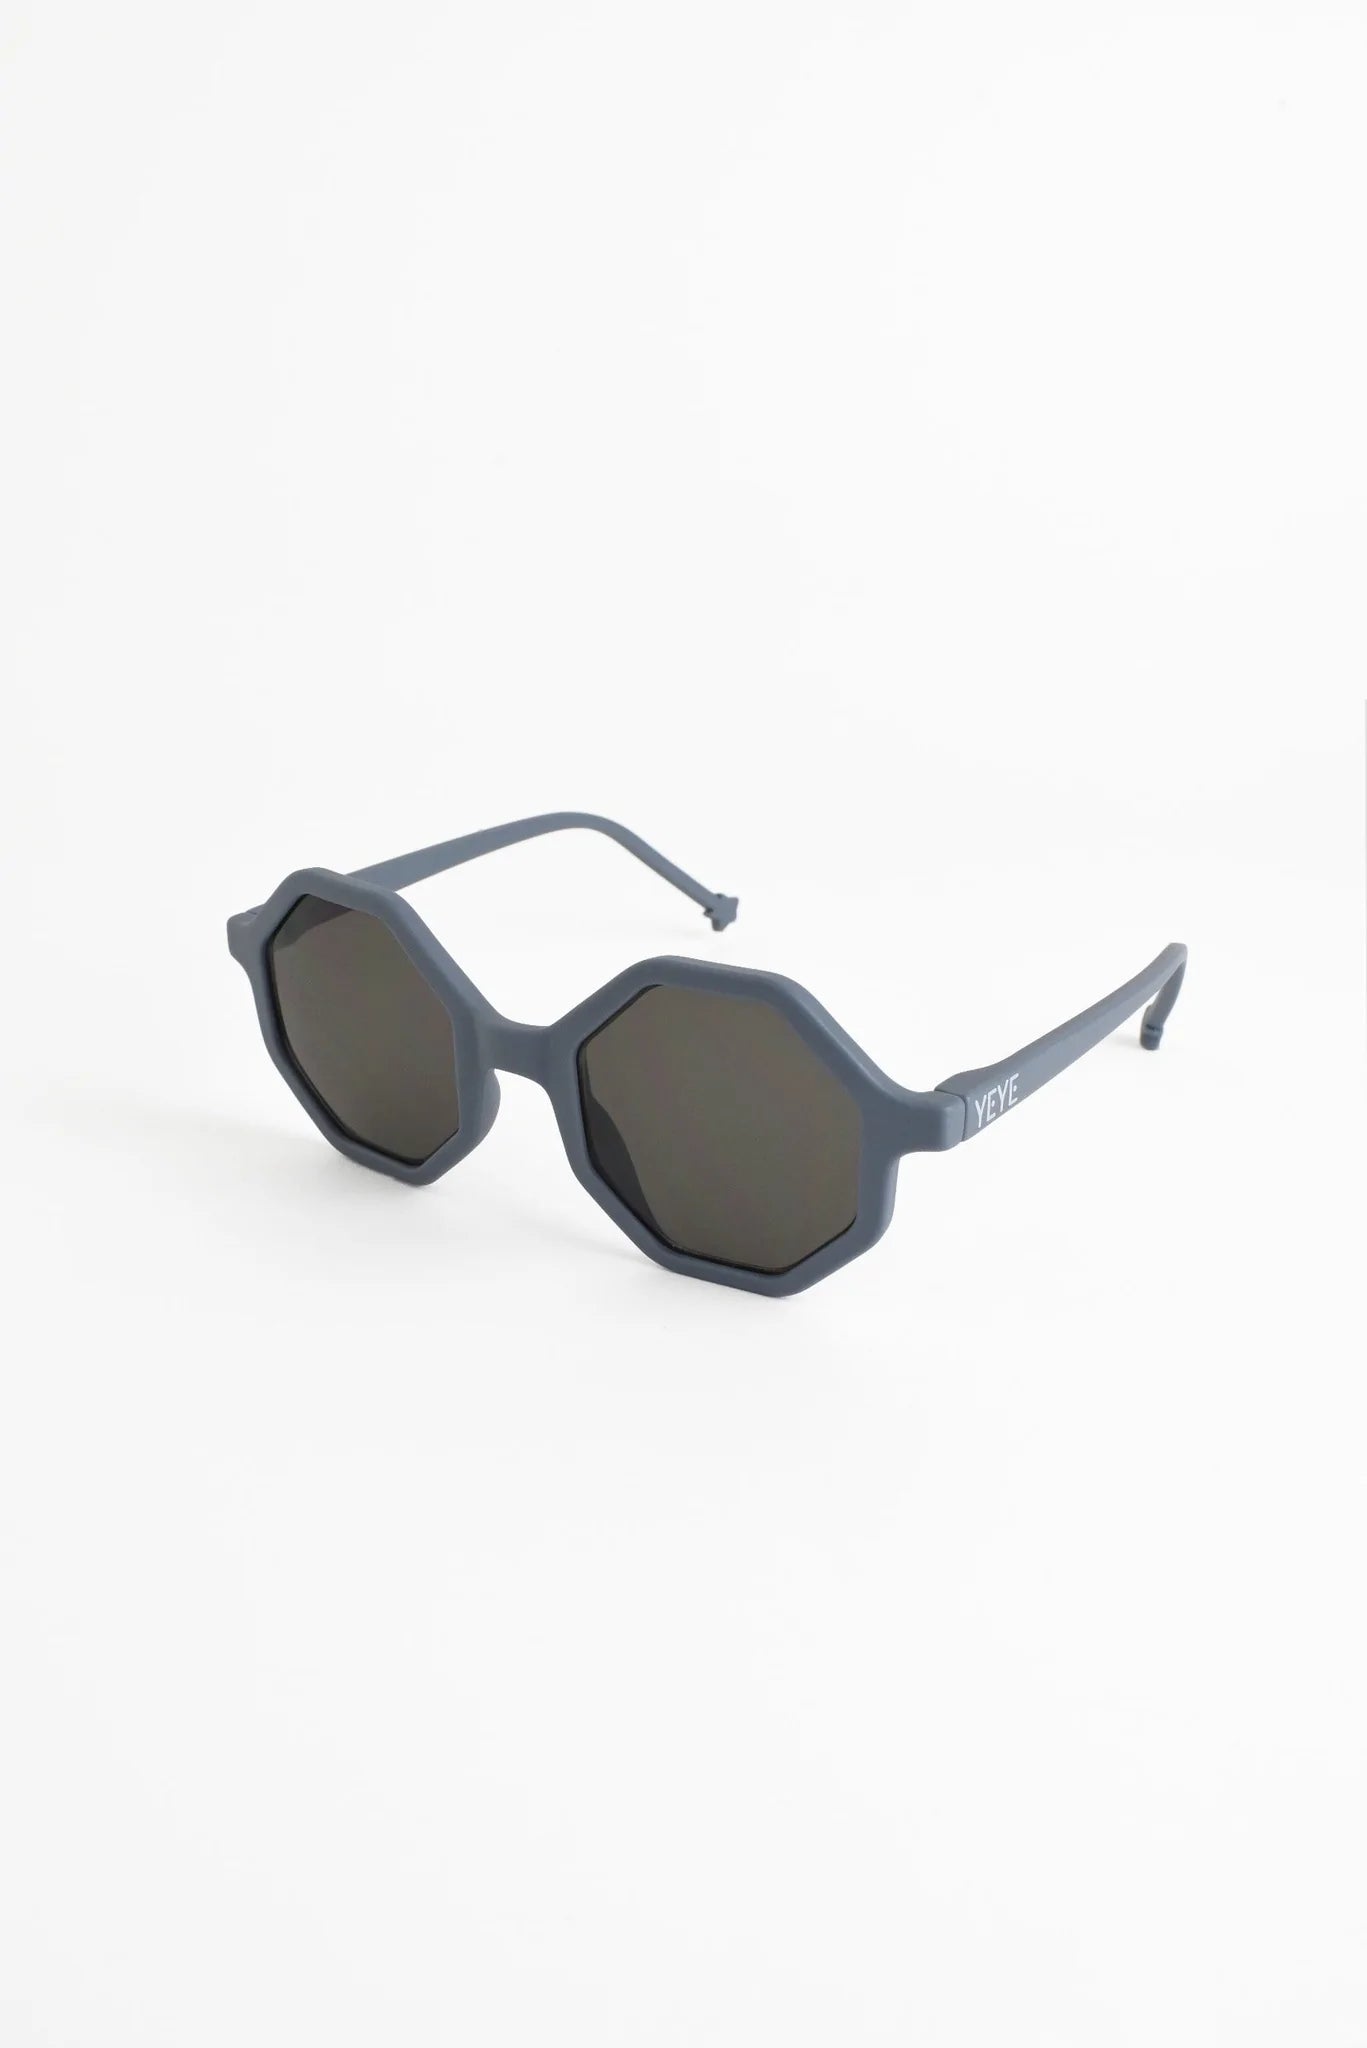 Sunglasses 2 to 8 years old - Gray blue